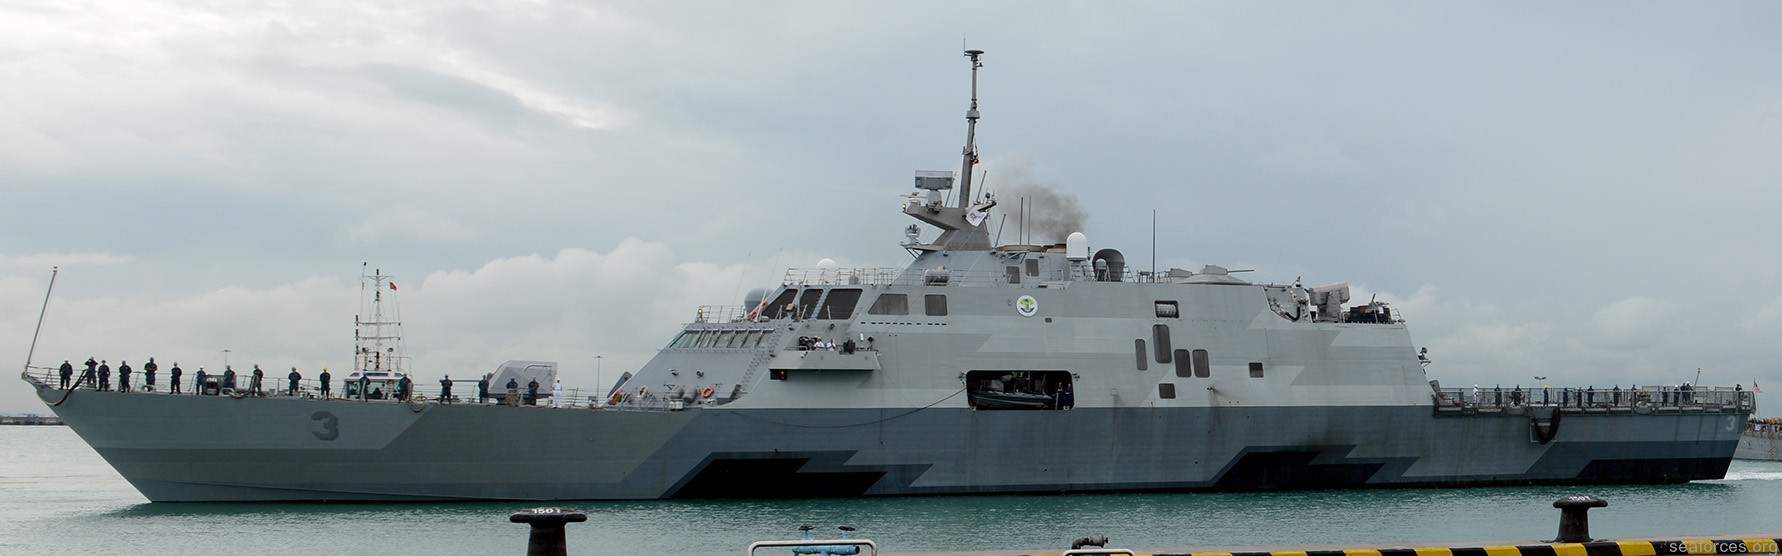 lcs-3 uss fort worth littoral combat ship freedom class us navy 30